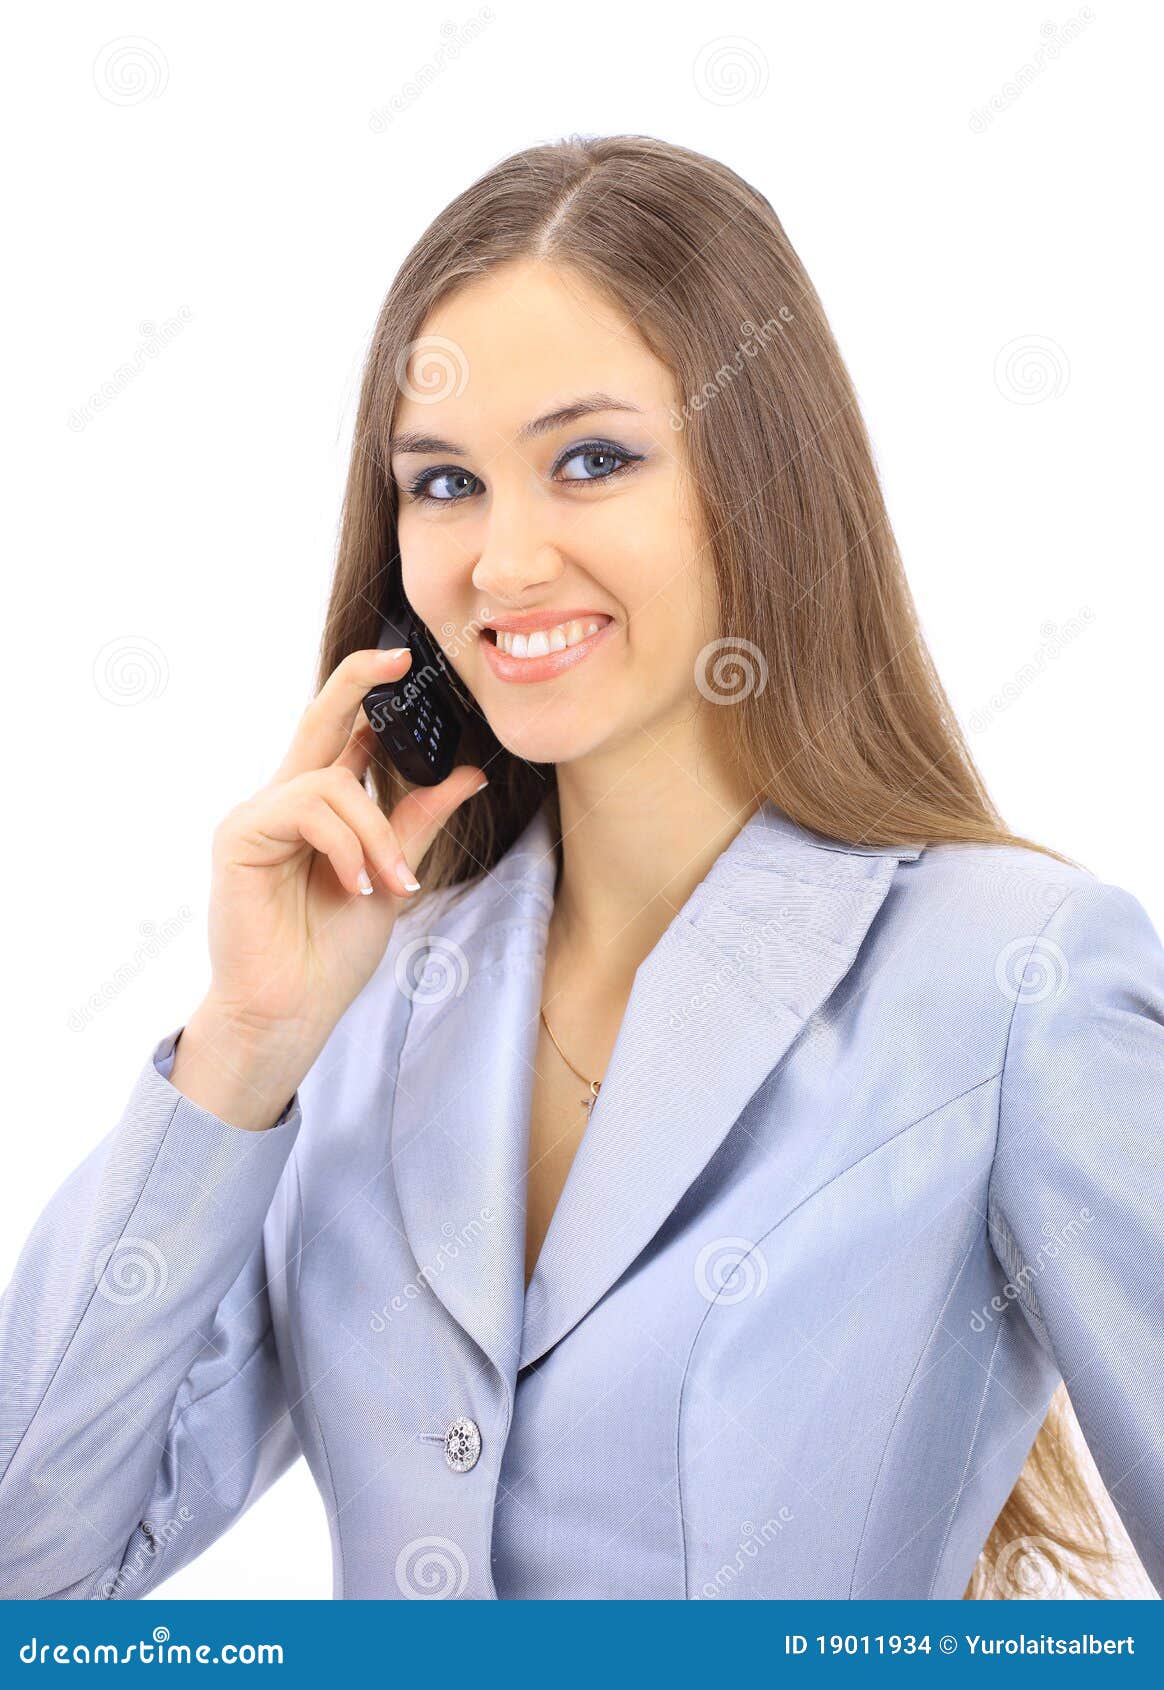 The Beautiful Business Woman Stock Images Image 19011934